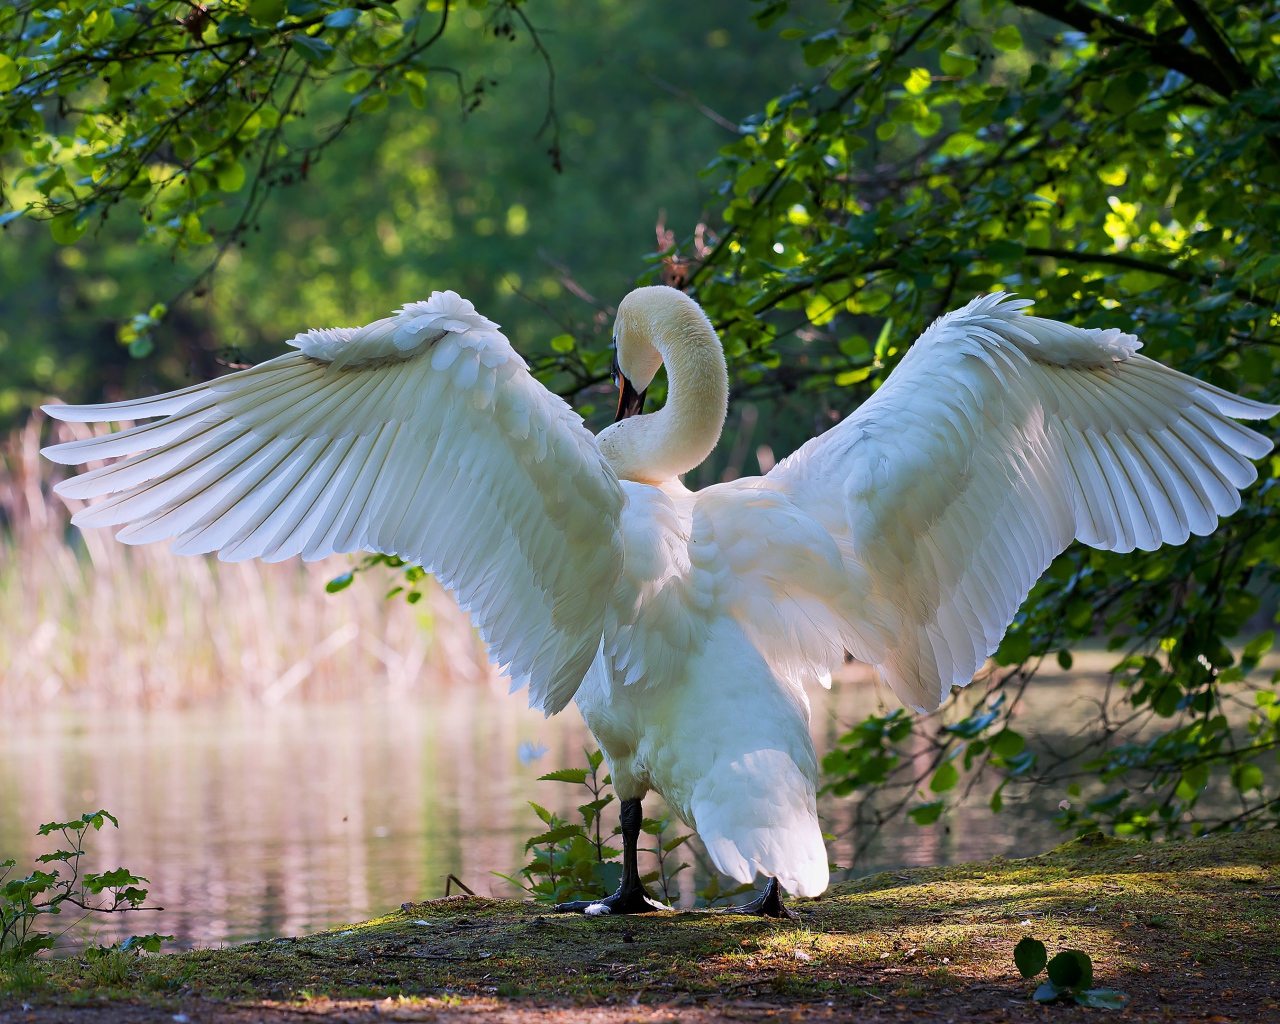 Big white swan spread its wings at the pond